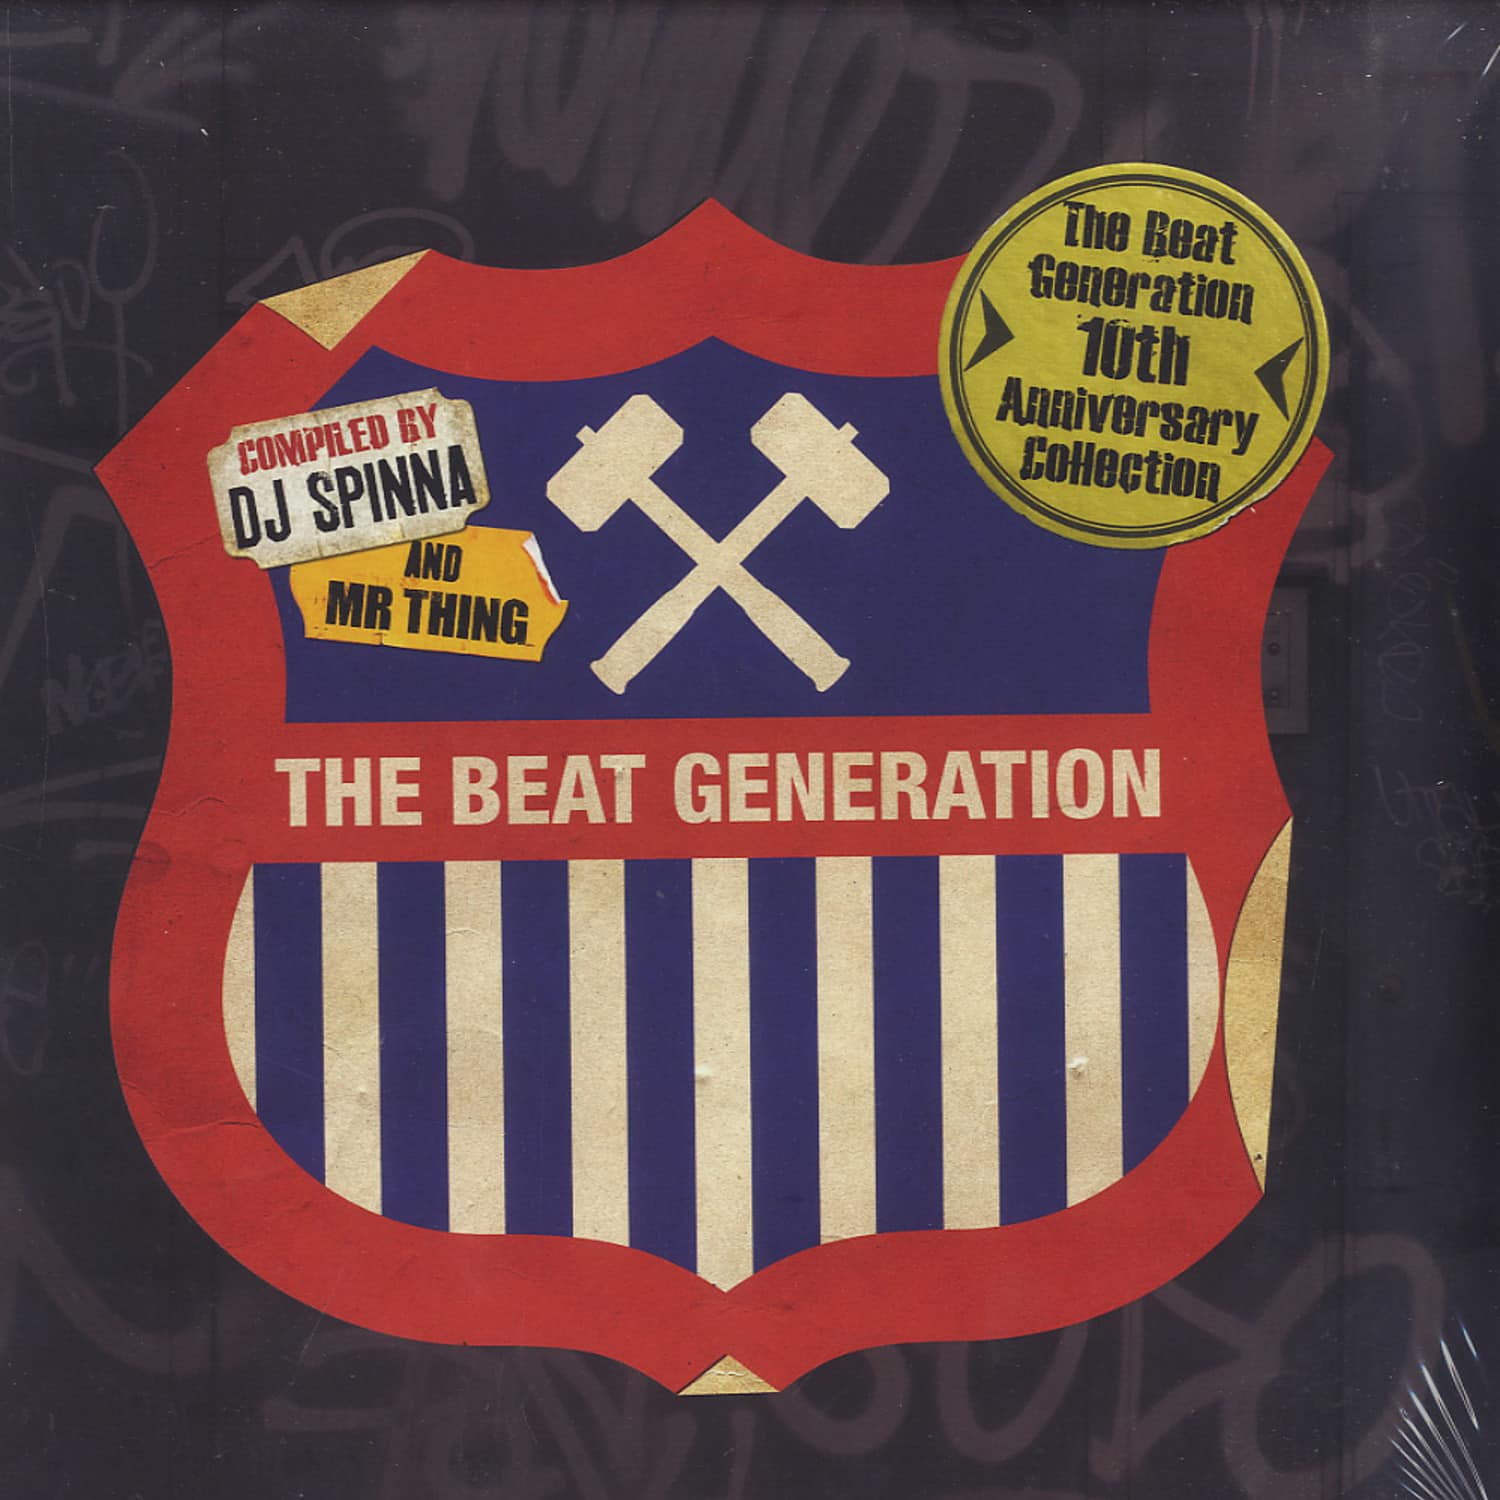 Various Artists - THE BEAT GENERATION 10 ANNIVERSARY COLLECTION